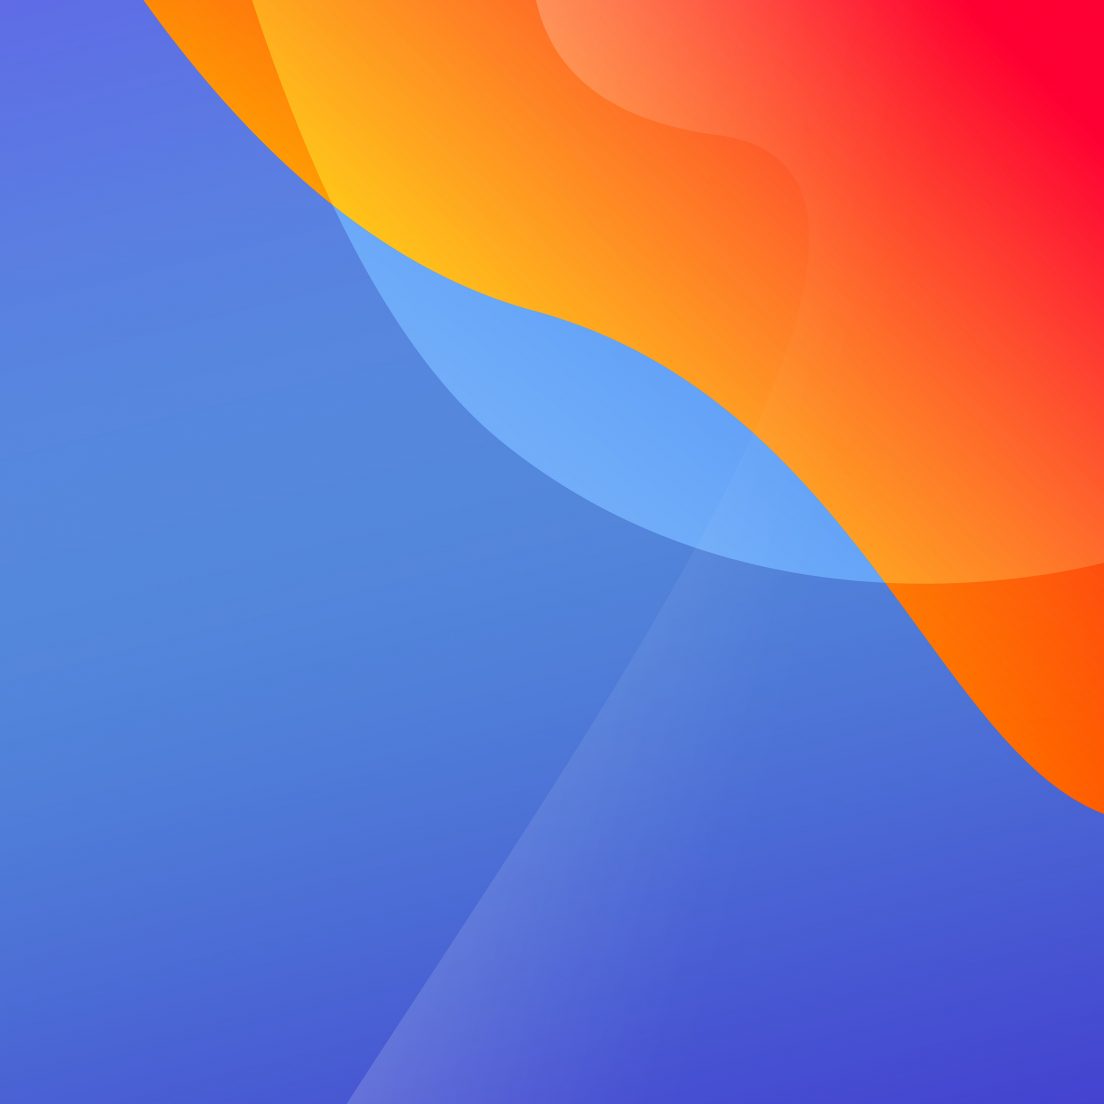 Blue to orange new gradient for iPad by @Hk3ToN on Twitter | Zollotech